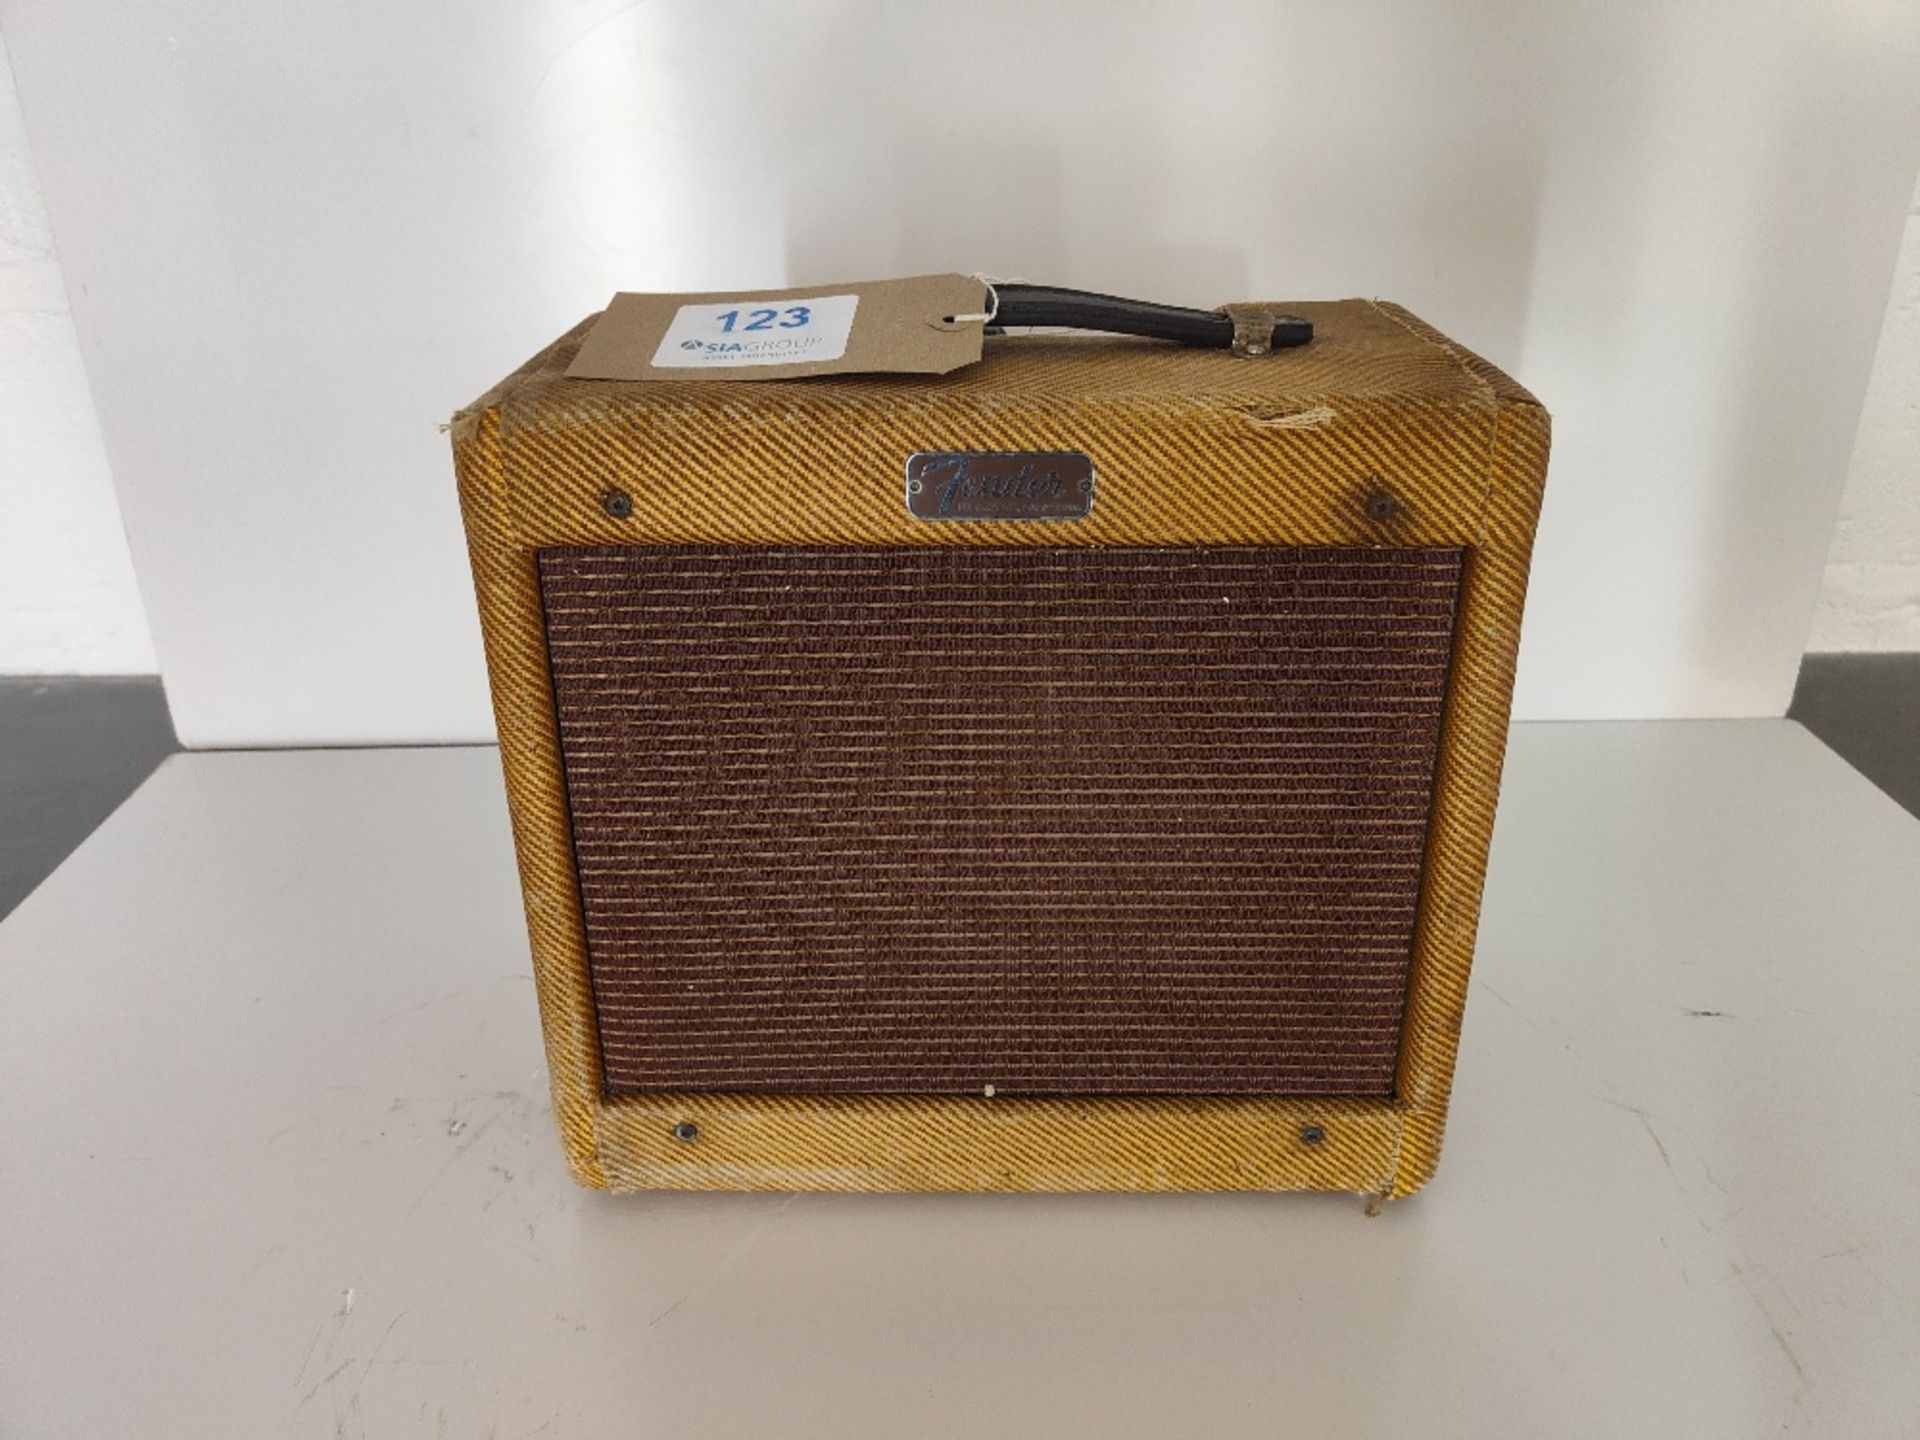 Small vintage Fender Champ amplifier